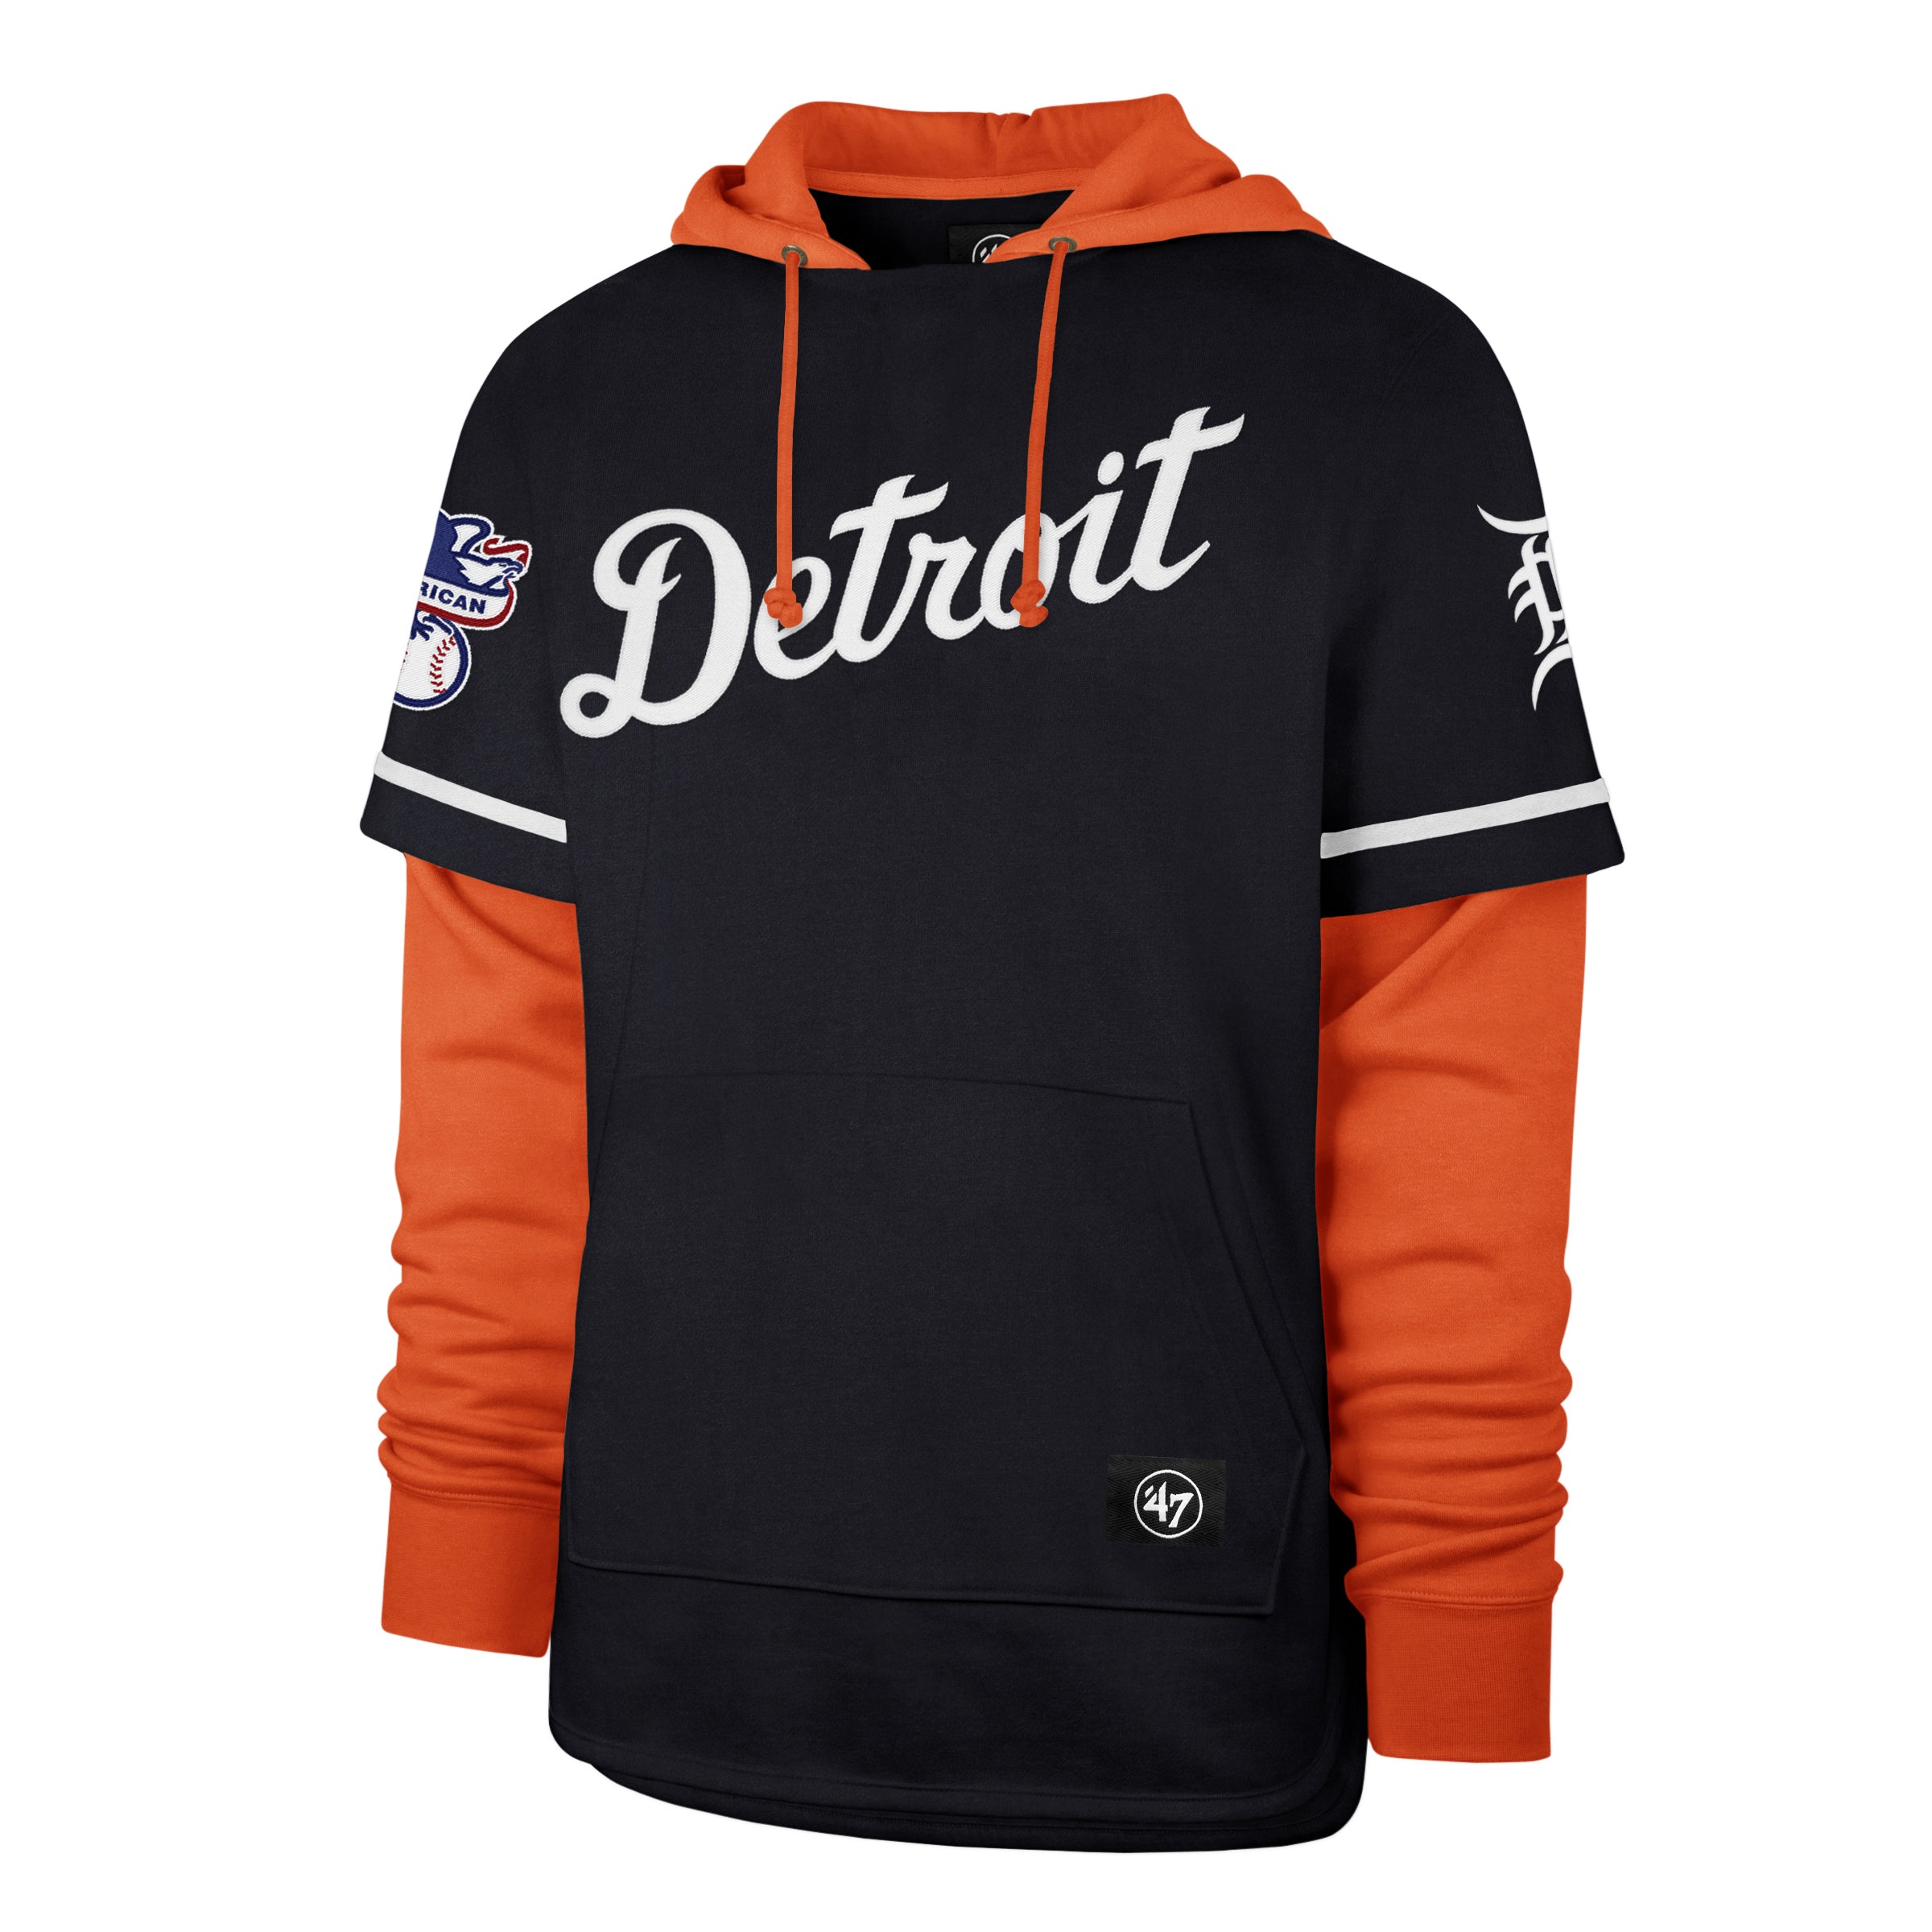 DETROIT TIGERS TRIFECTA '47 SHORTSTOP PULLOVER